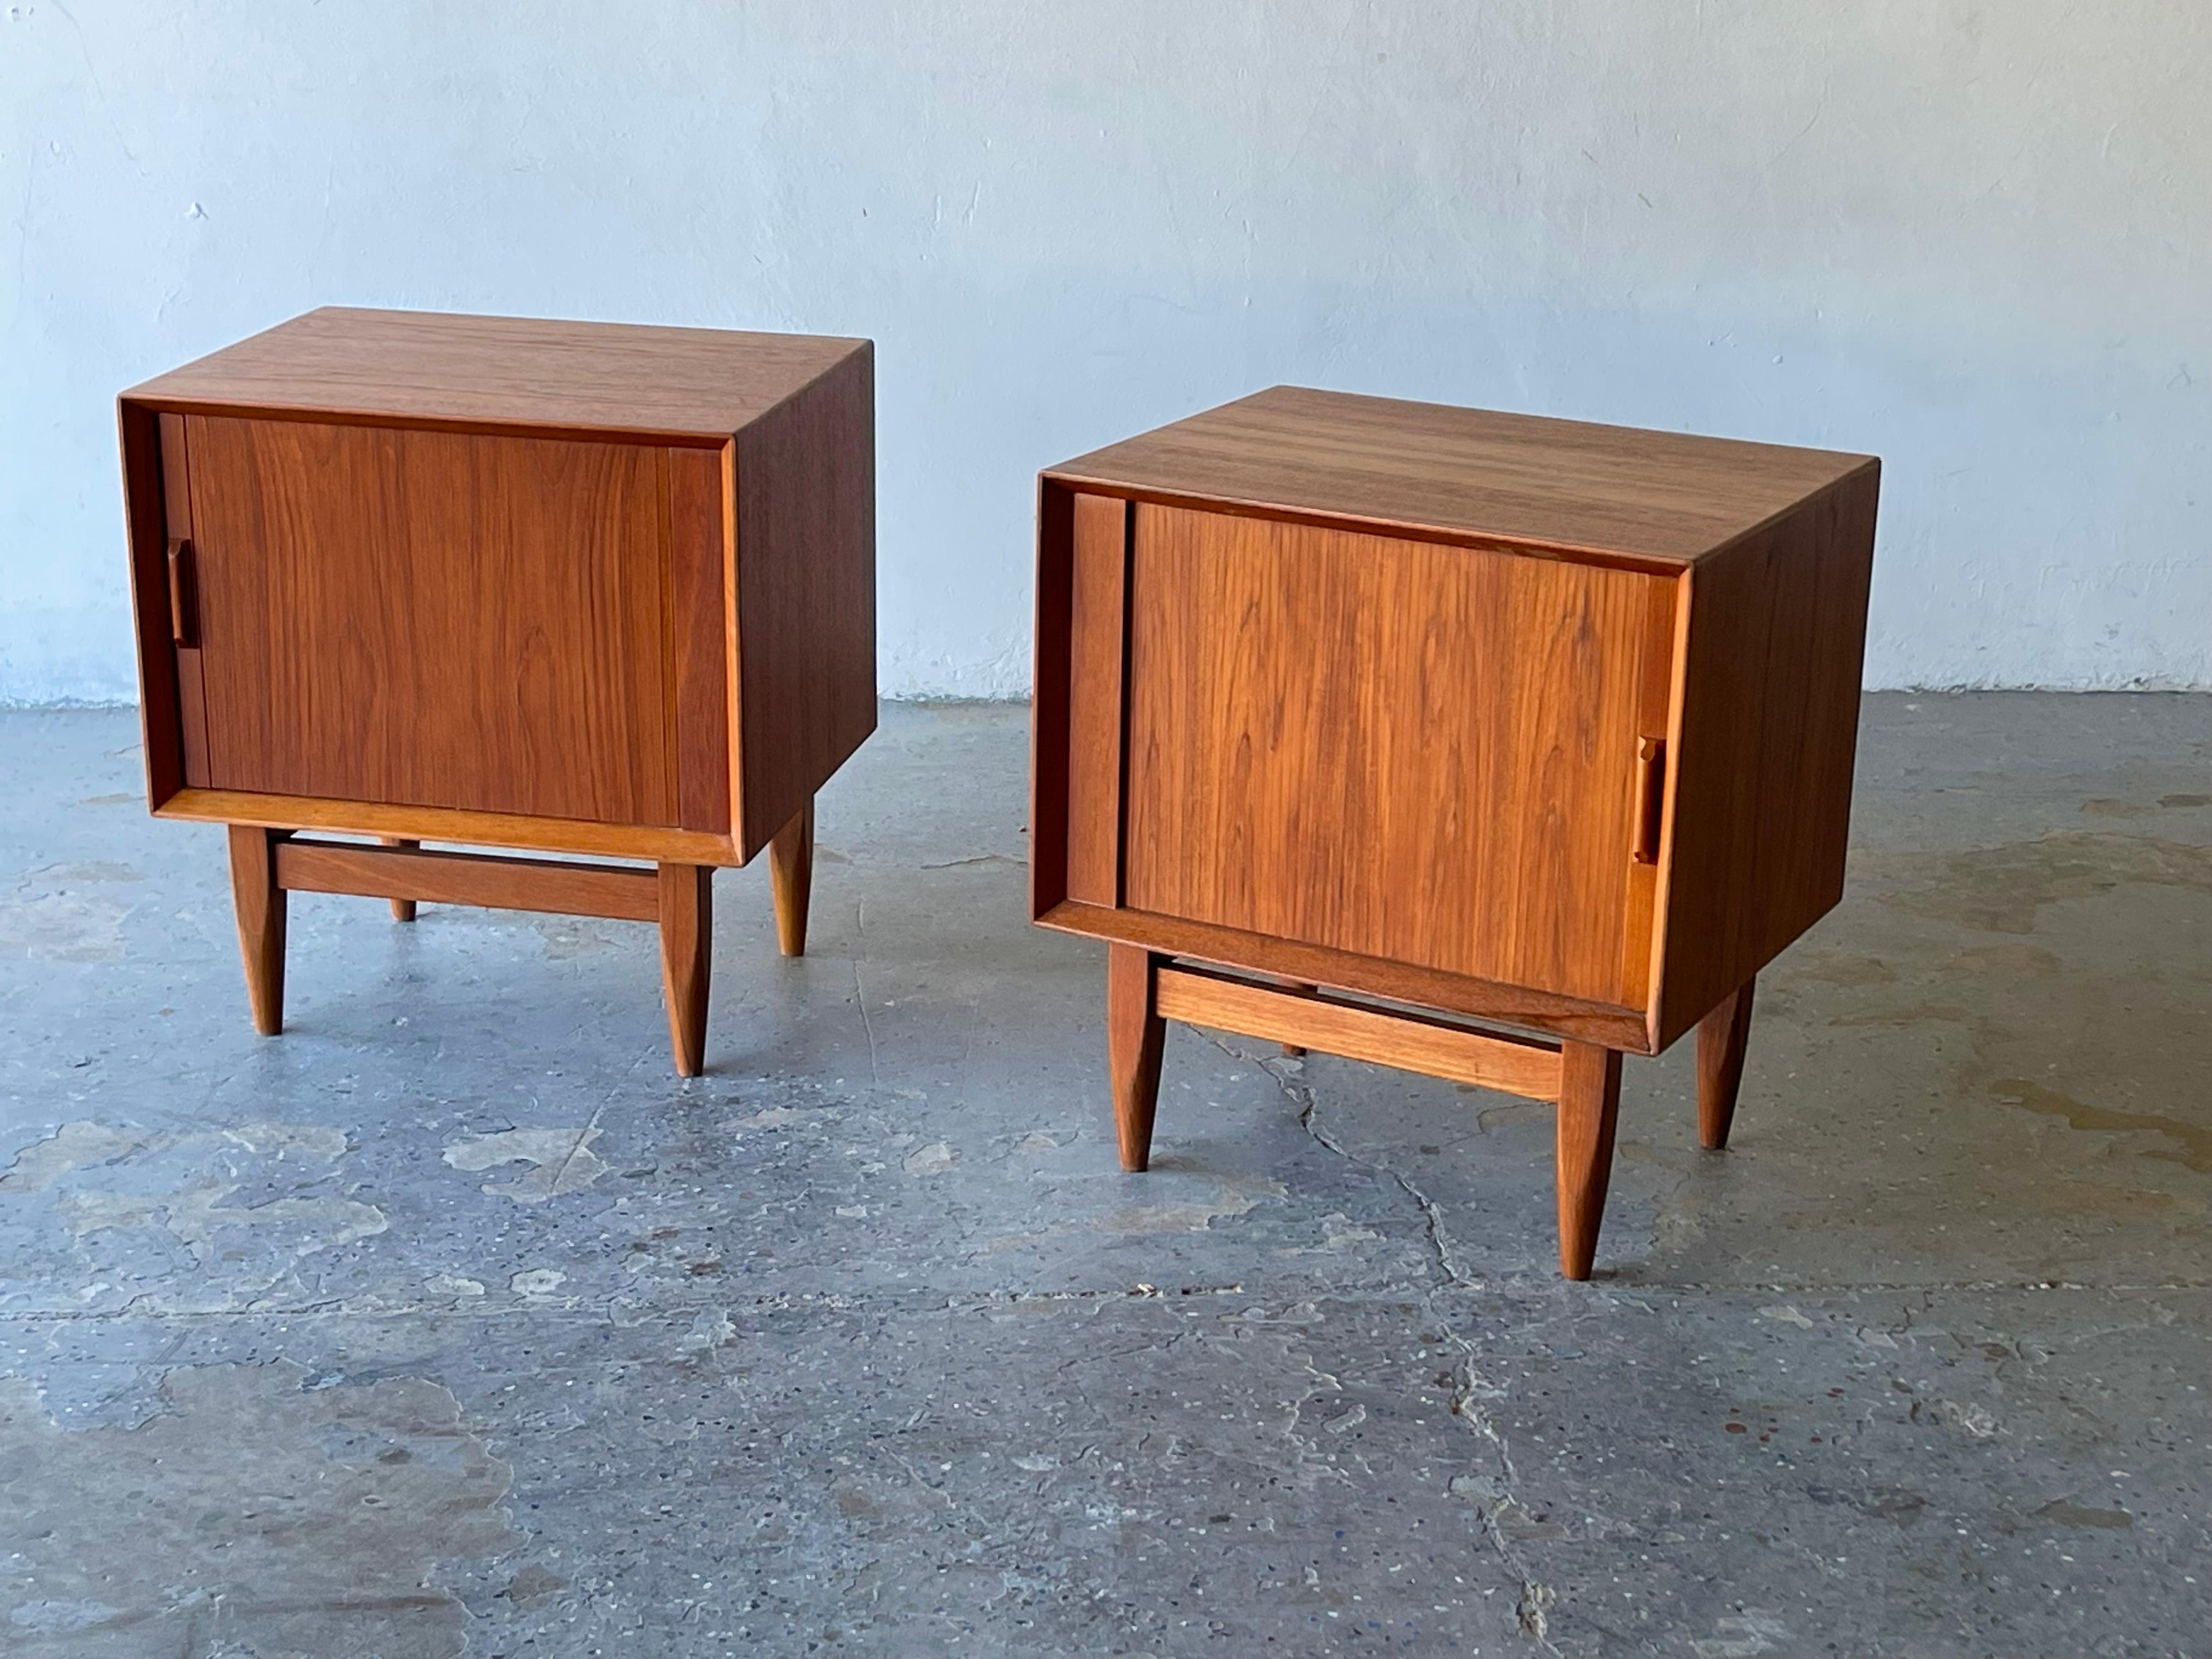 Pair of teak Scandinavian modern nightstands or end tables designed by Svend Madsen for Falster Denmark. Tambour doors slide smoothly to reveal an adjustable shelf and a pull out drawer. Cabinets are finished on all sides so that they may be floated